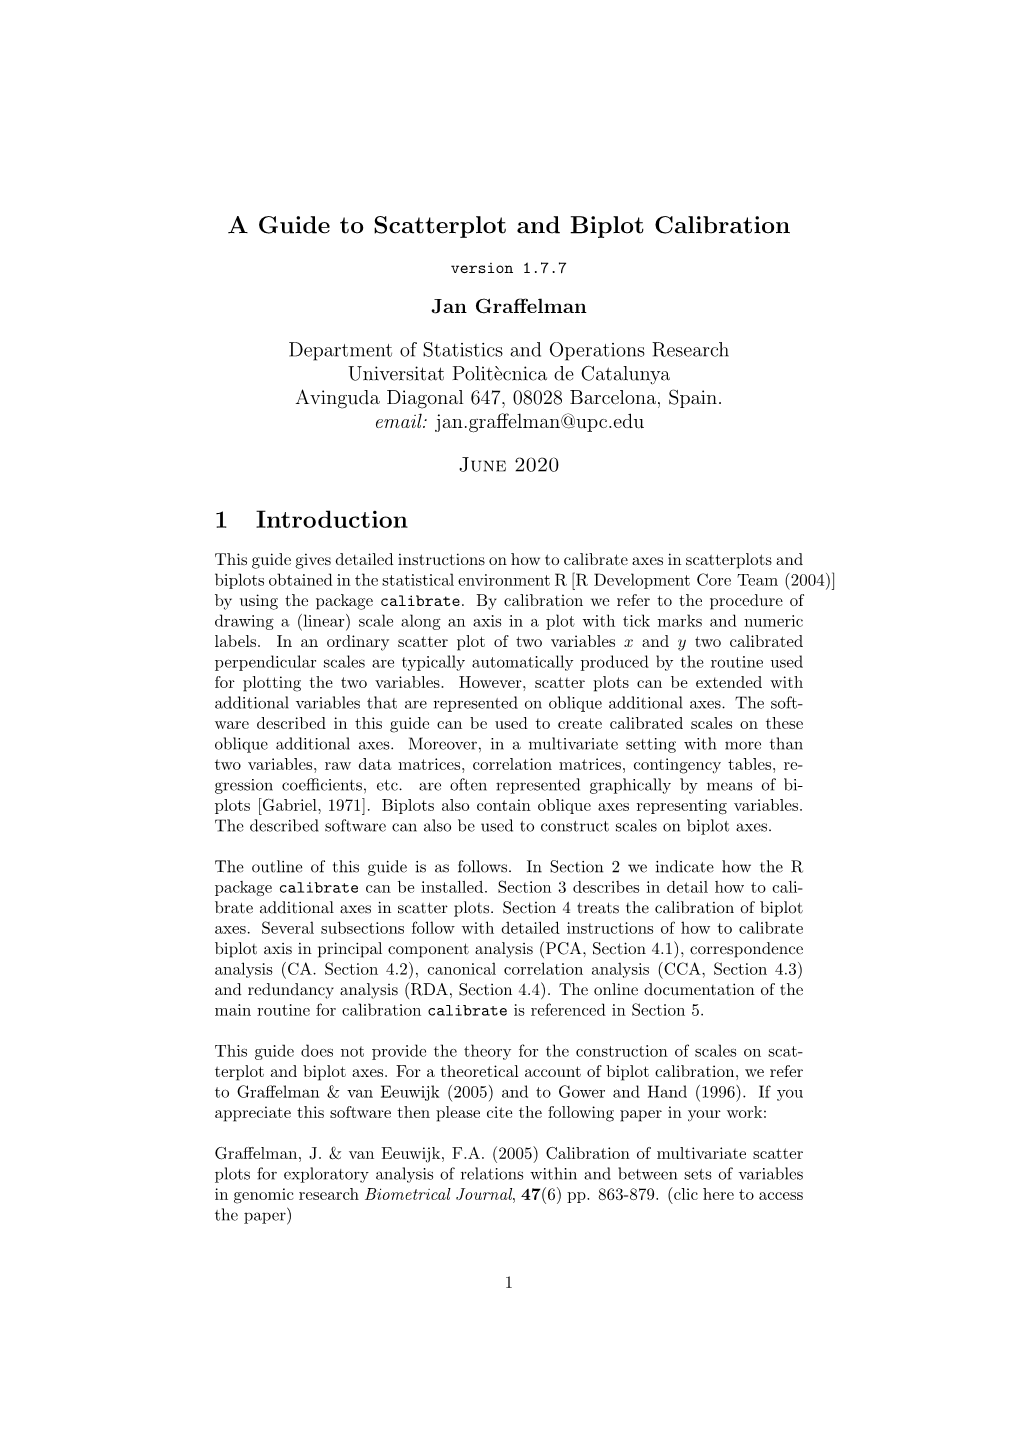 A Guide to Scatterplot and Biplot Calibration 1 Introduction